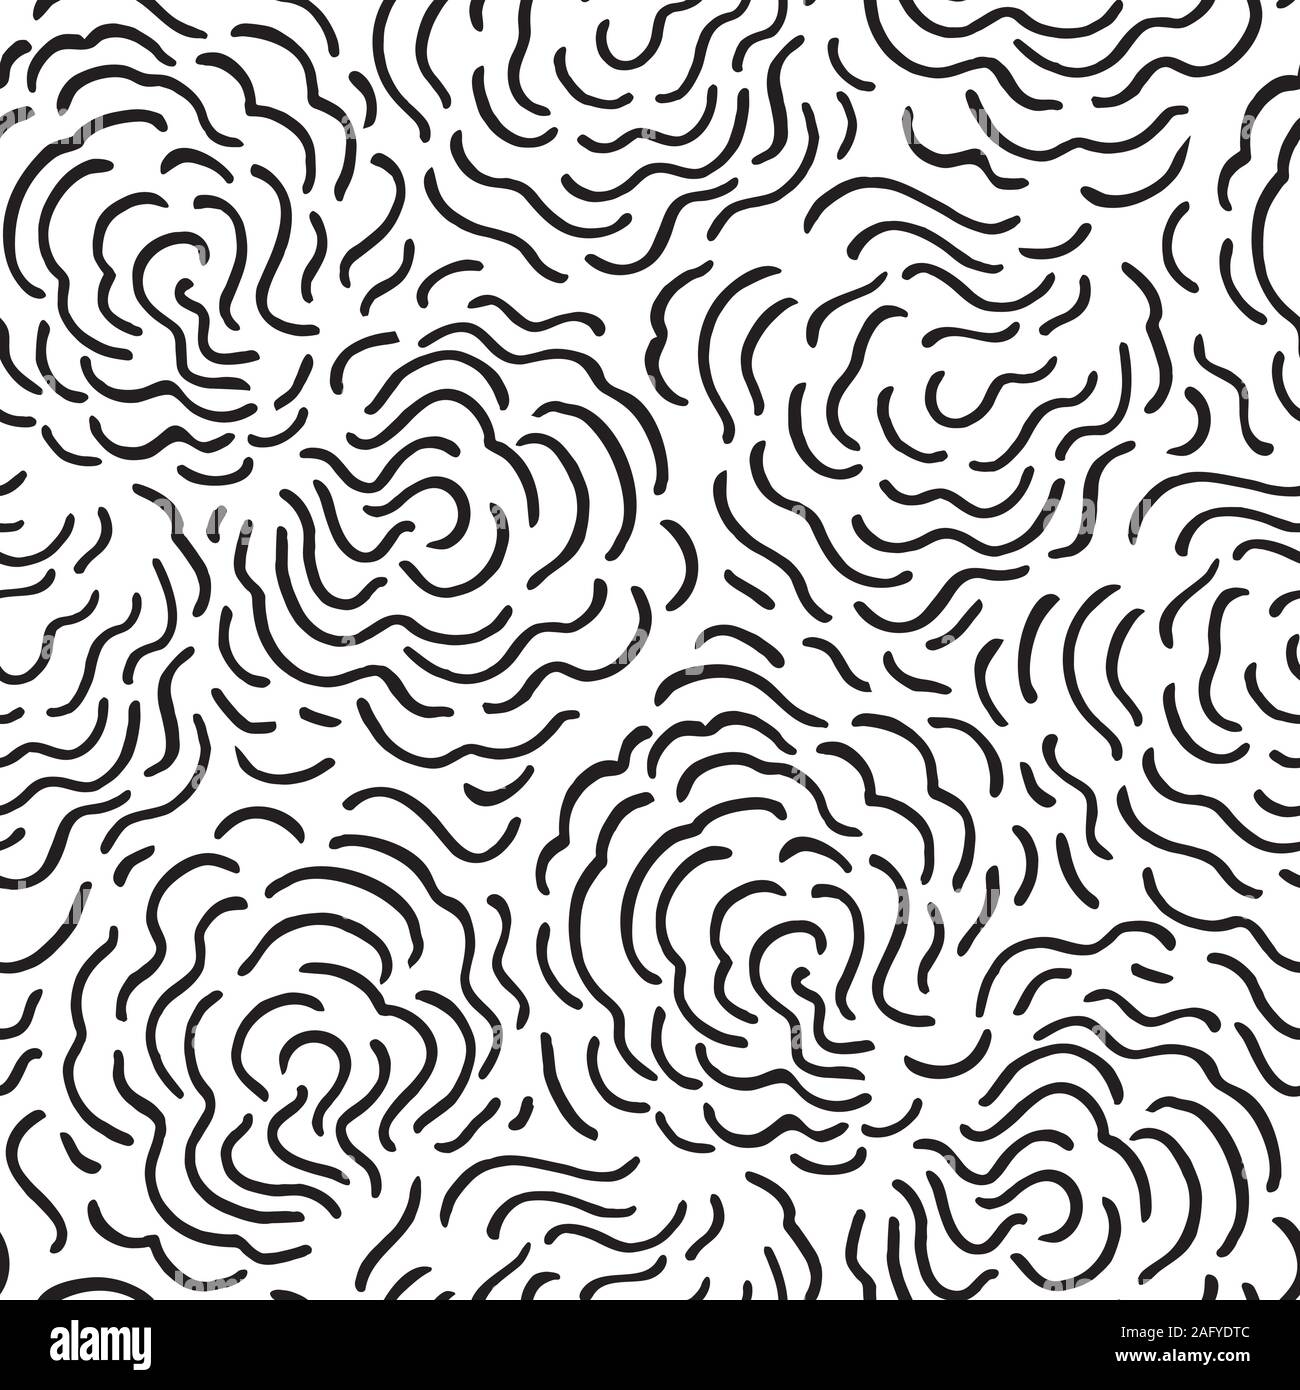 Seamless abstract hand drawn cloud pattern with hand painted irregular black line art swirl in wavy movement. Graphic and modern design for scrapbooking, stationary, fashion and packaging design. Stock Vector